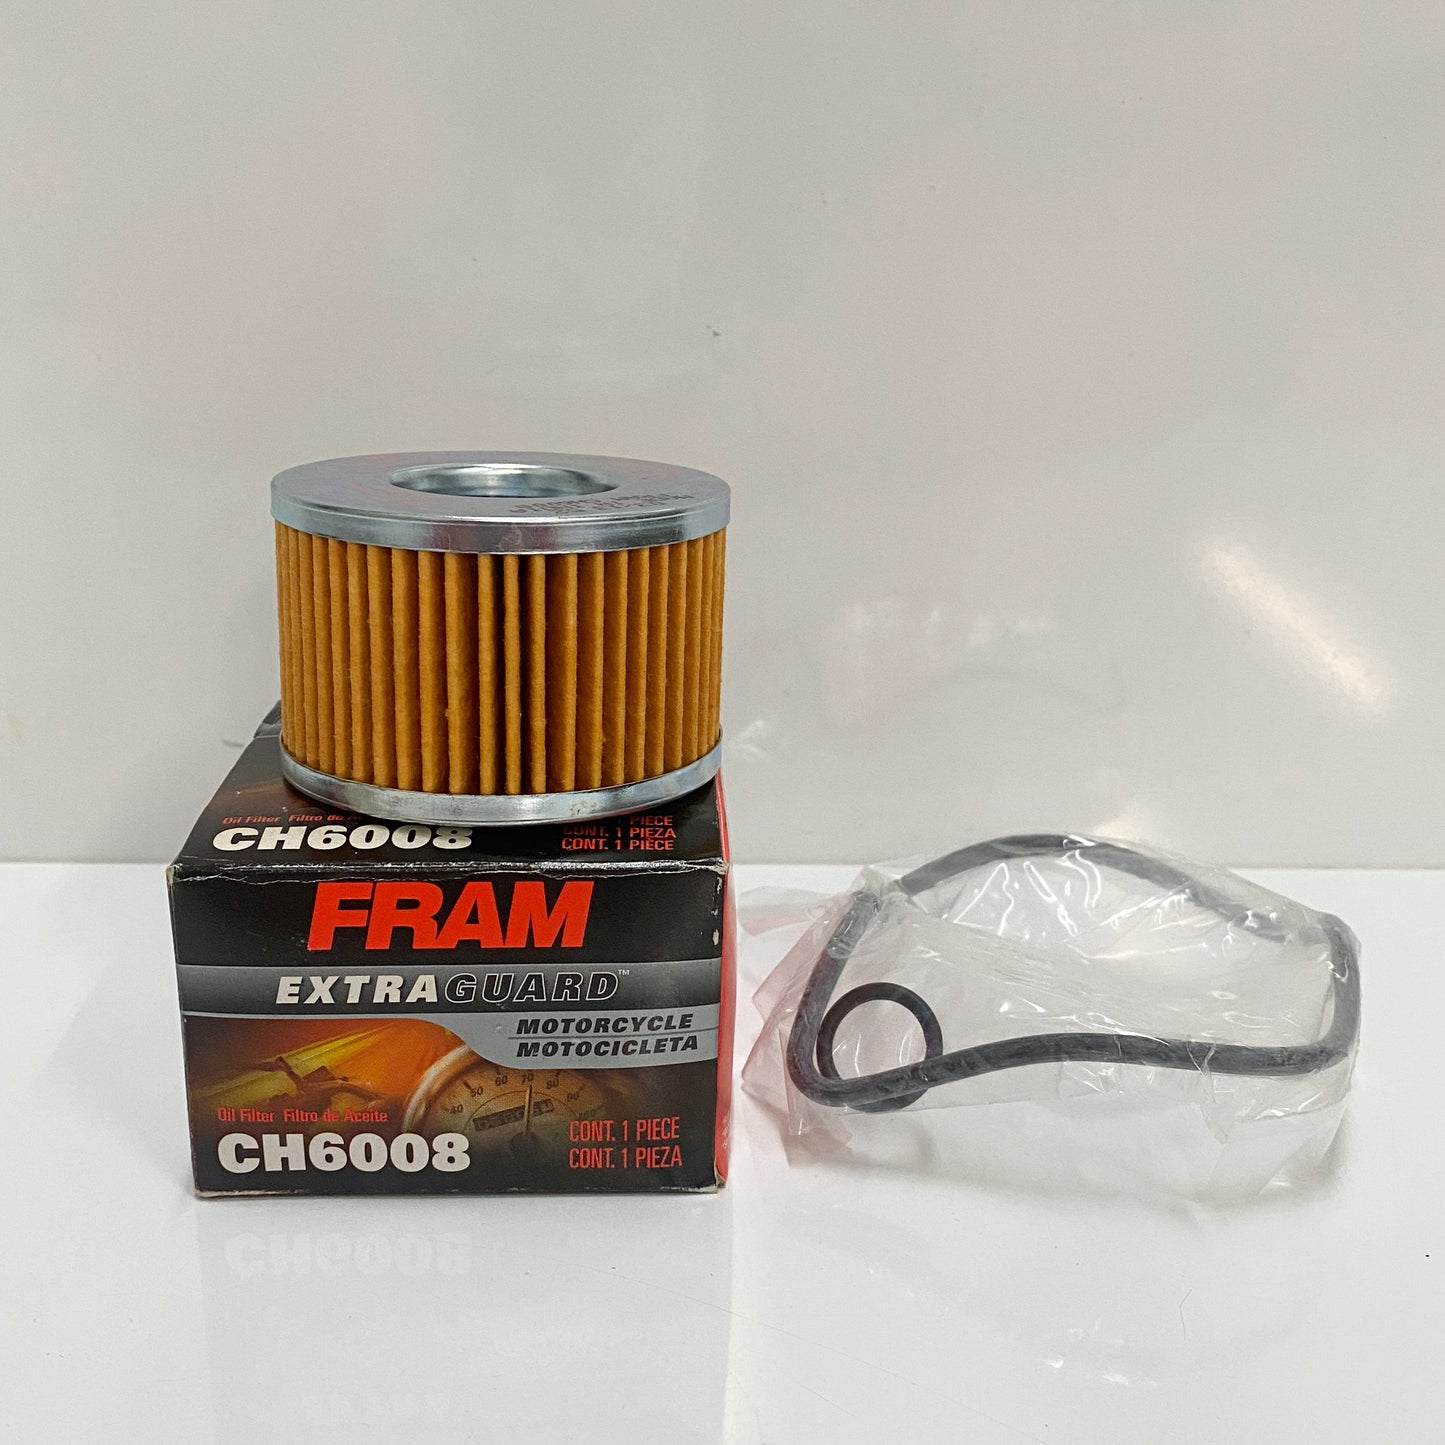 FRAM CH6008 EXTRA GUARD MOTORCYCLE OIL FILTER